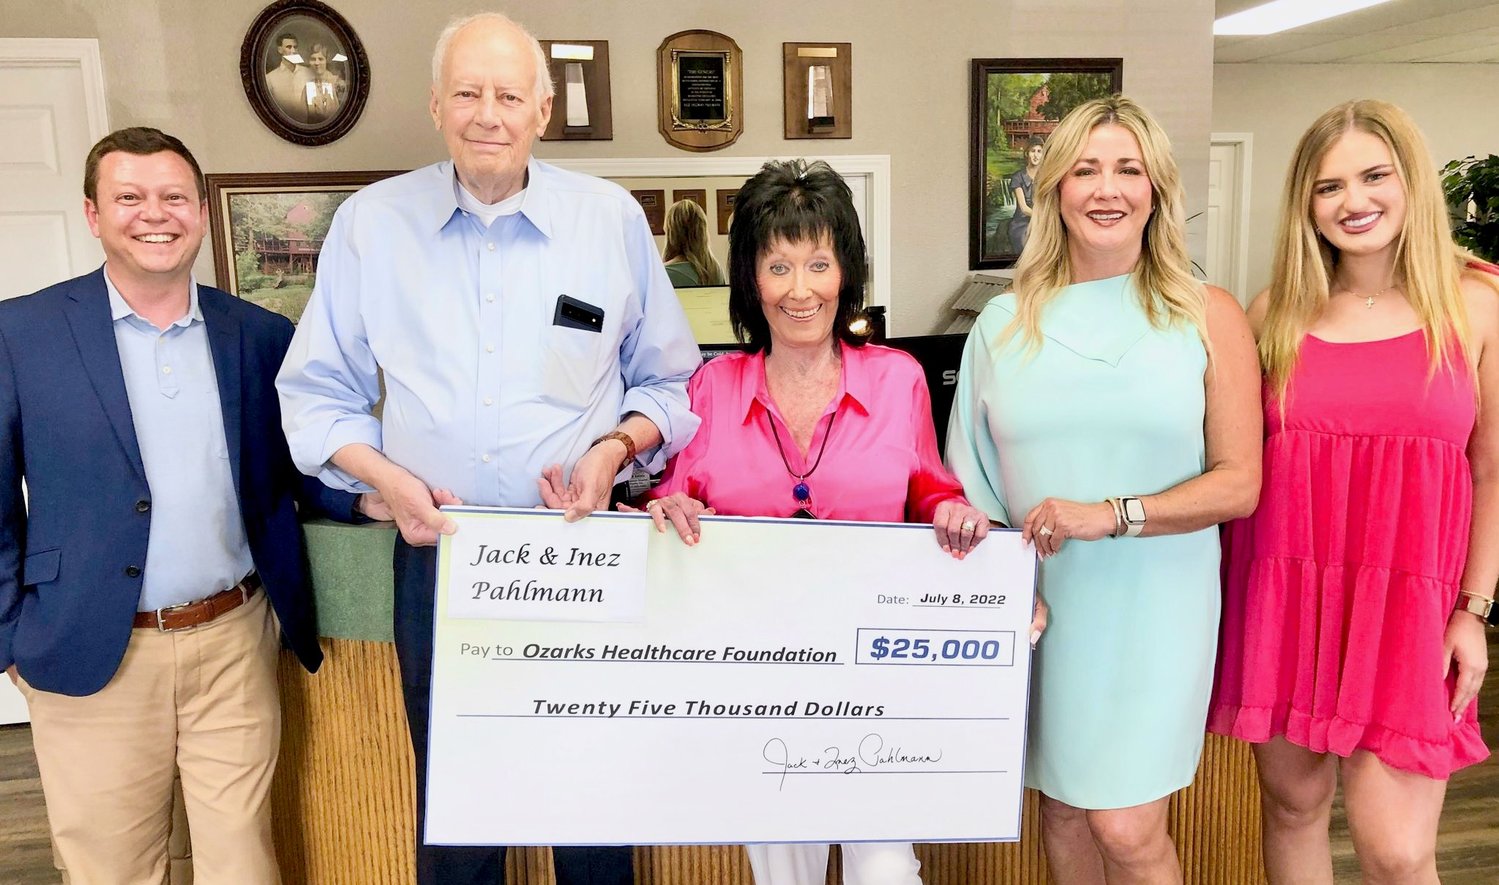 Ozarks Healthcare Foundation has received a gift of $25,000 to support the foundation’s fundraising campaign for a mobile mammography unit. From left: Ozarks Healthcare Vice President of Development Josh Reeves, donors Jack and Inez Pahlmann, their daughter Kim Grennan and their granddaughter, Kim’s daughter, Sydni Miller.